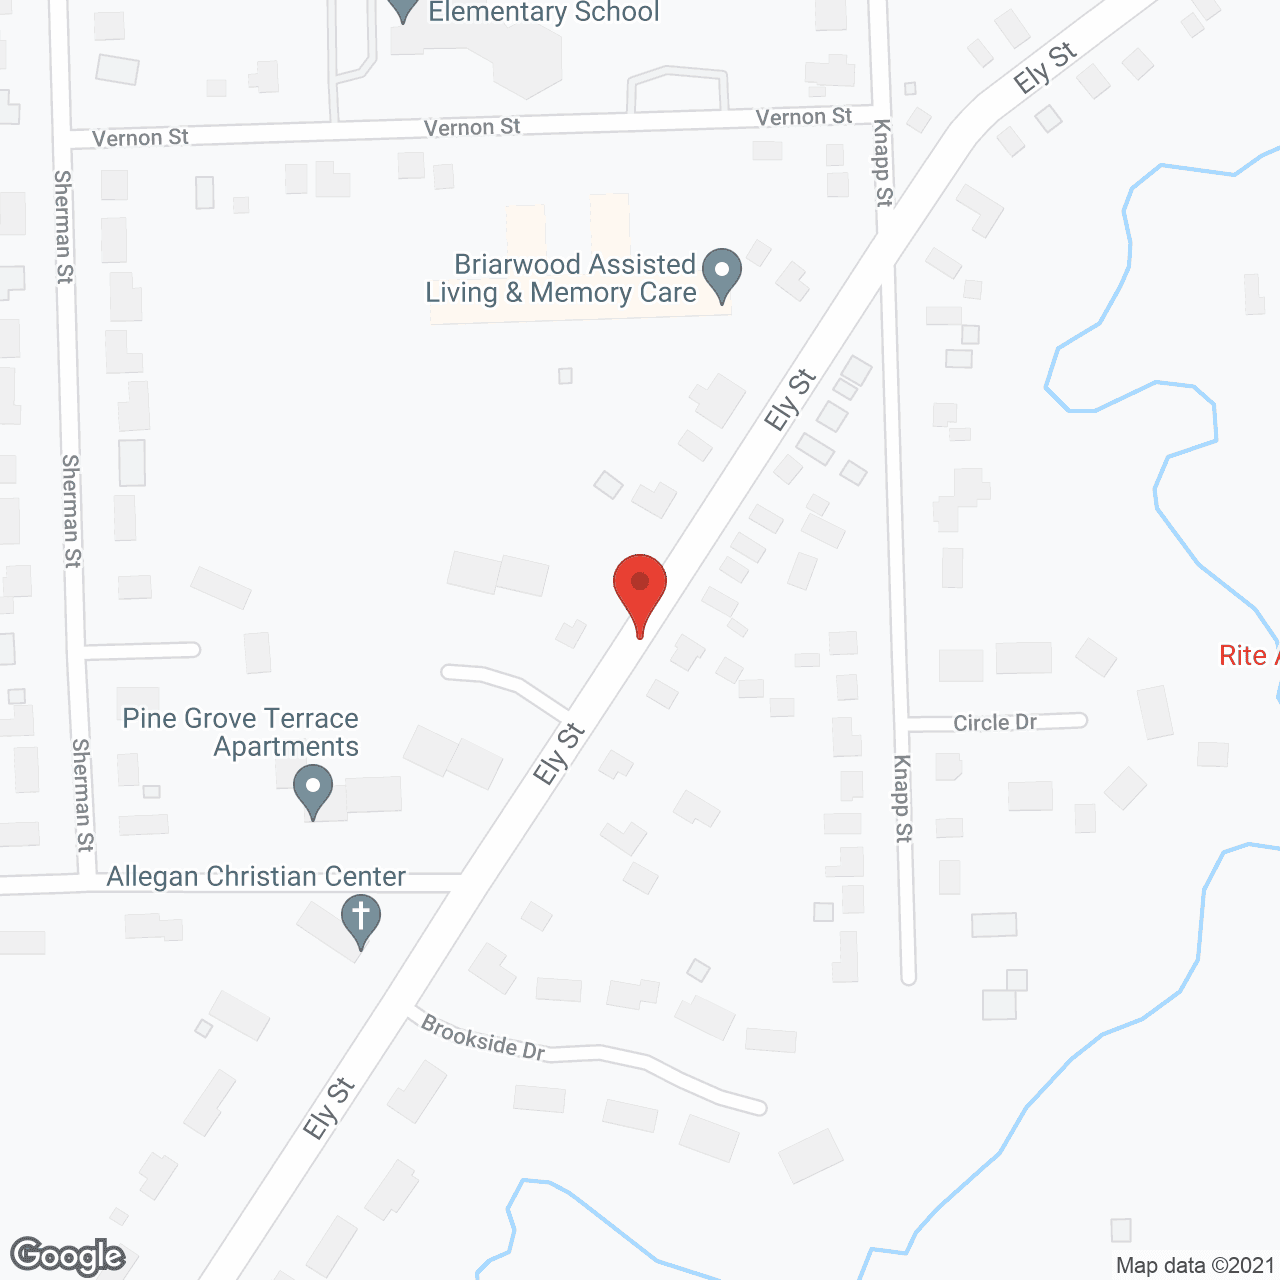 Briarwood Assisted Living & Memory Care in google map